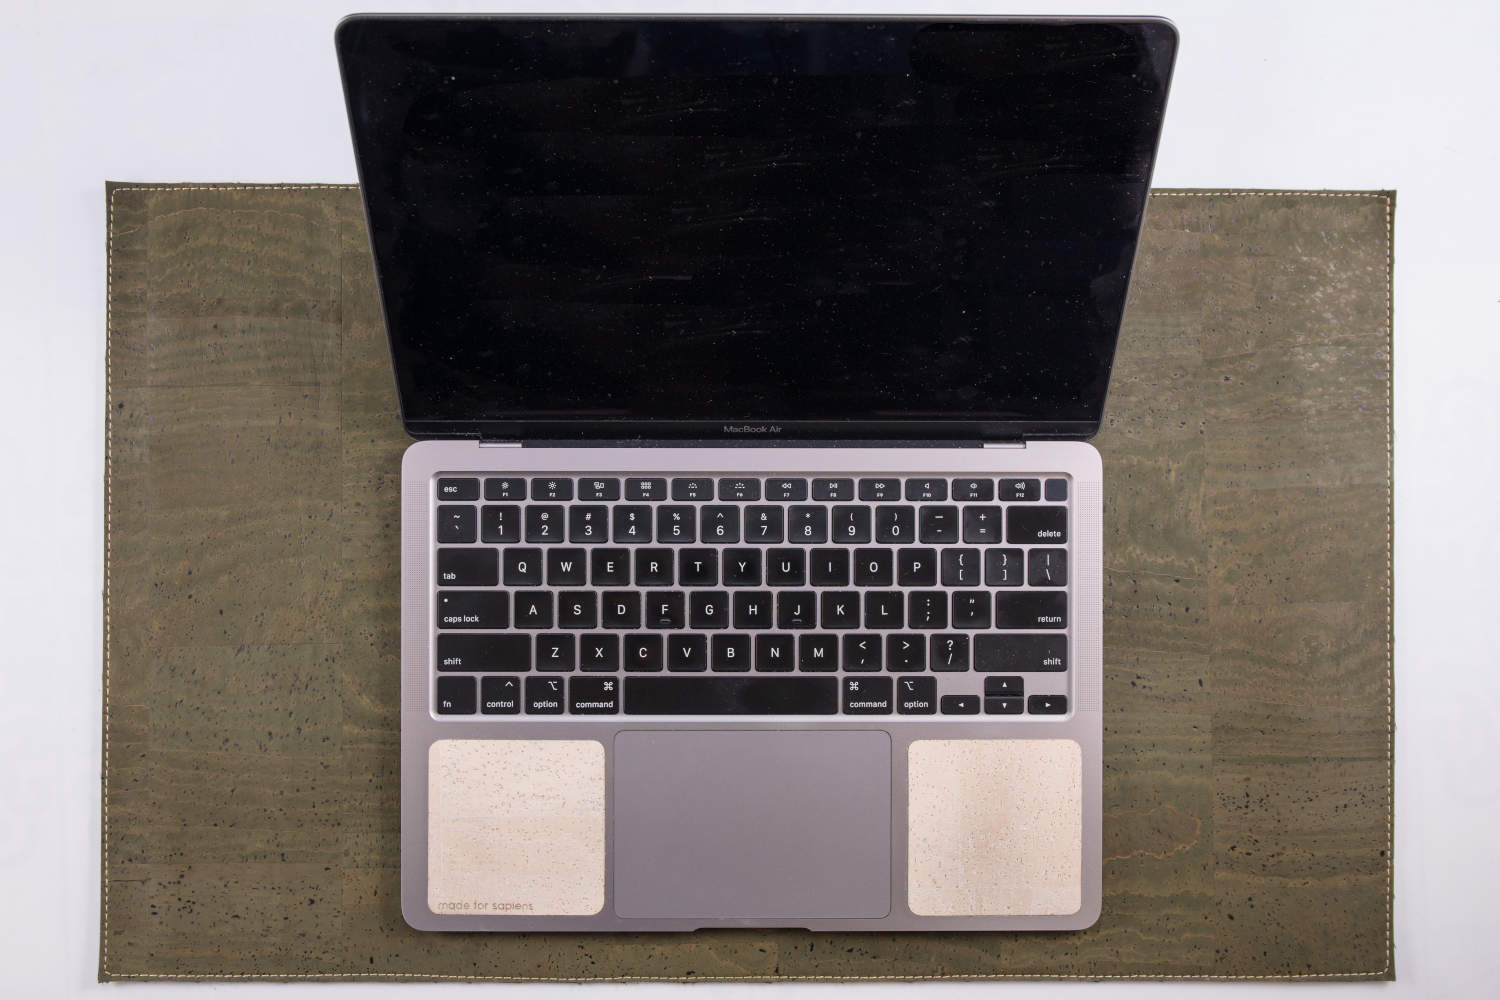 Overhead view of 13-inch Macbook on green cork leather laptop desk pad